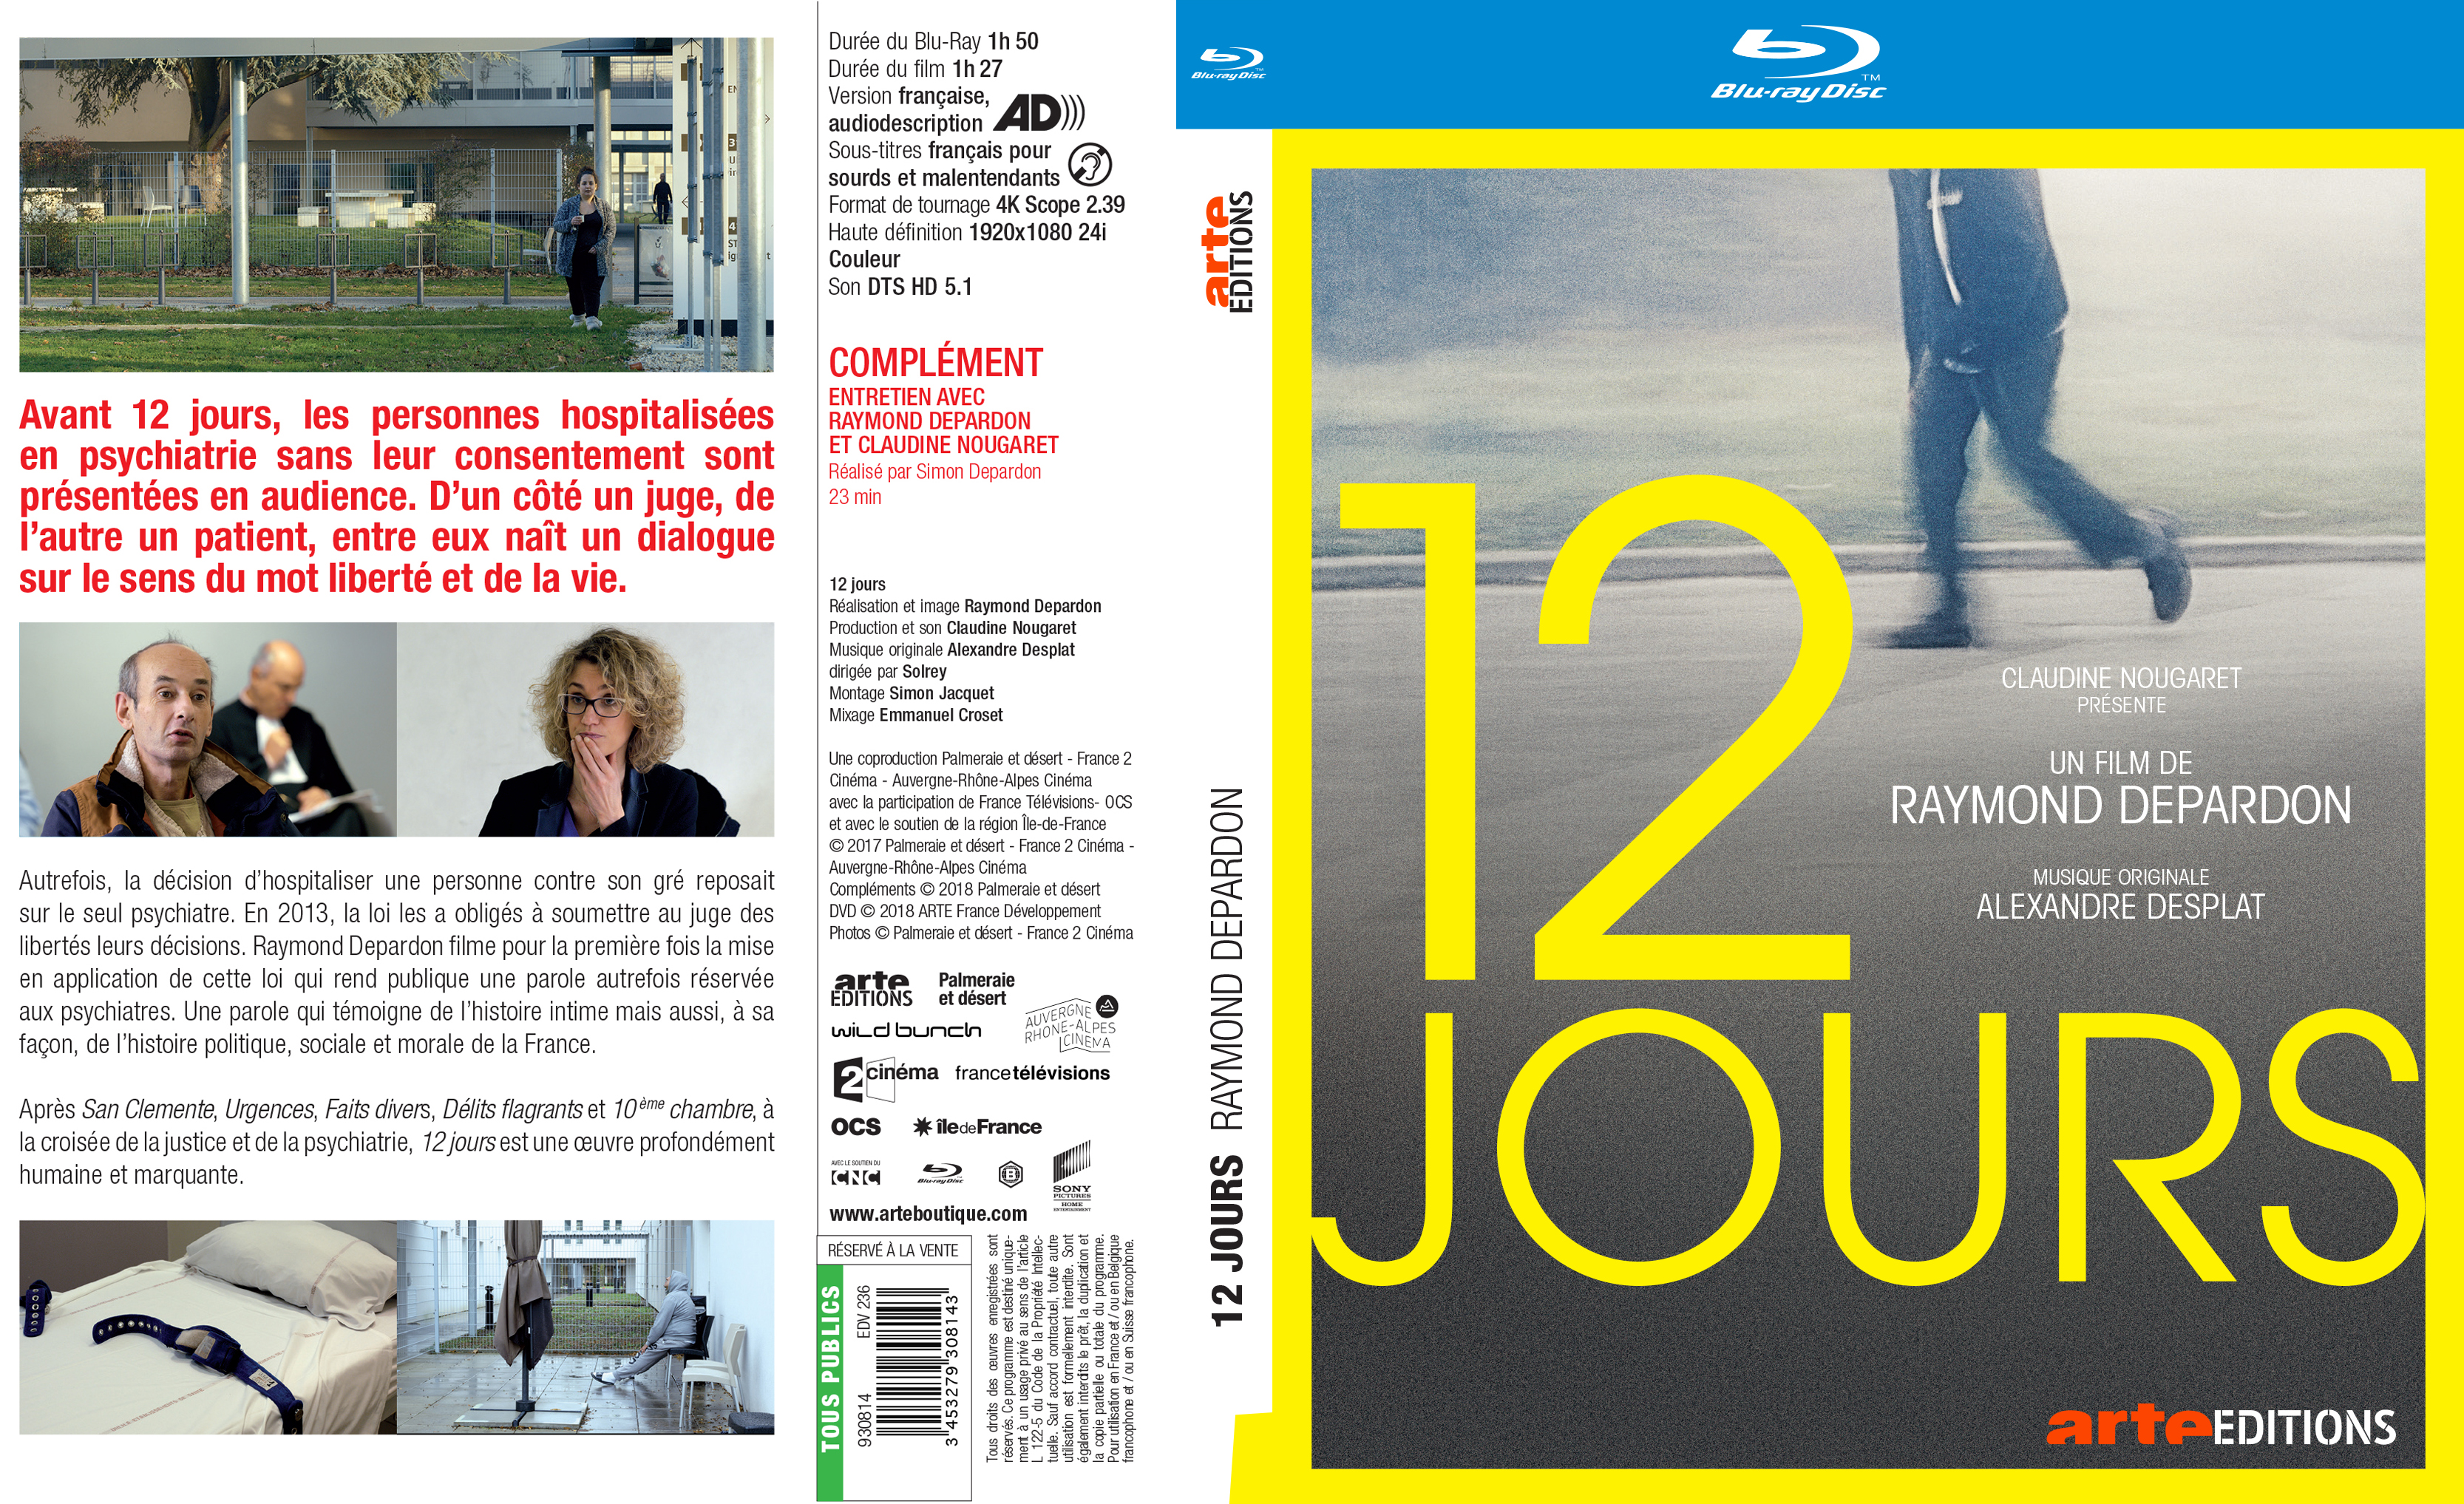 Jaquette DVD 12 jours (BLU-RAY)